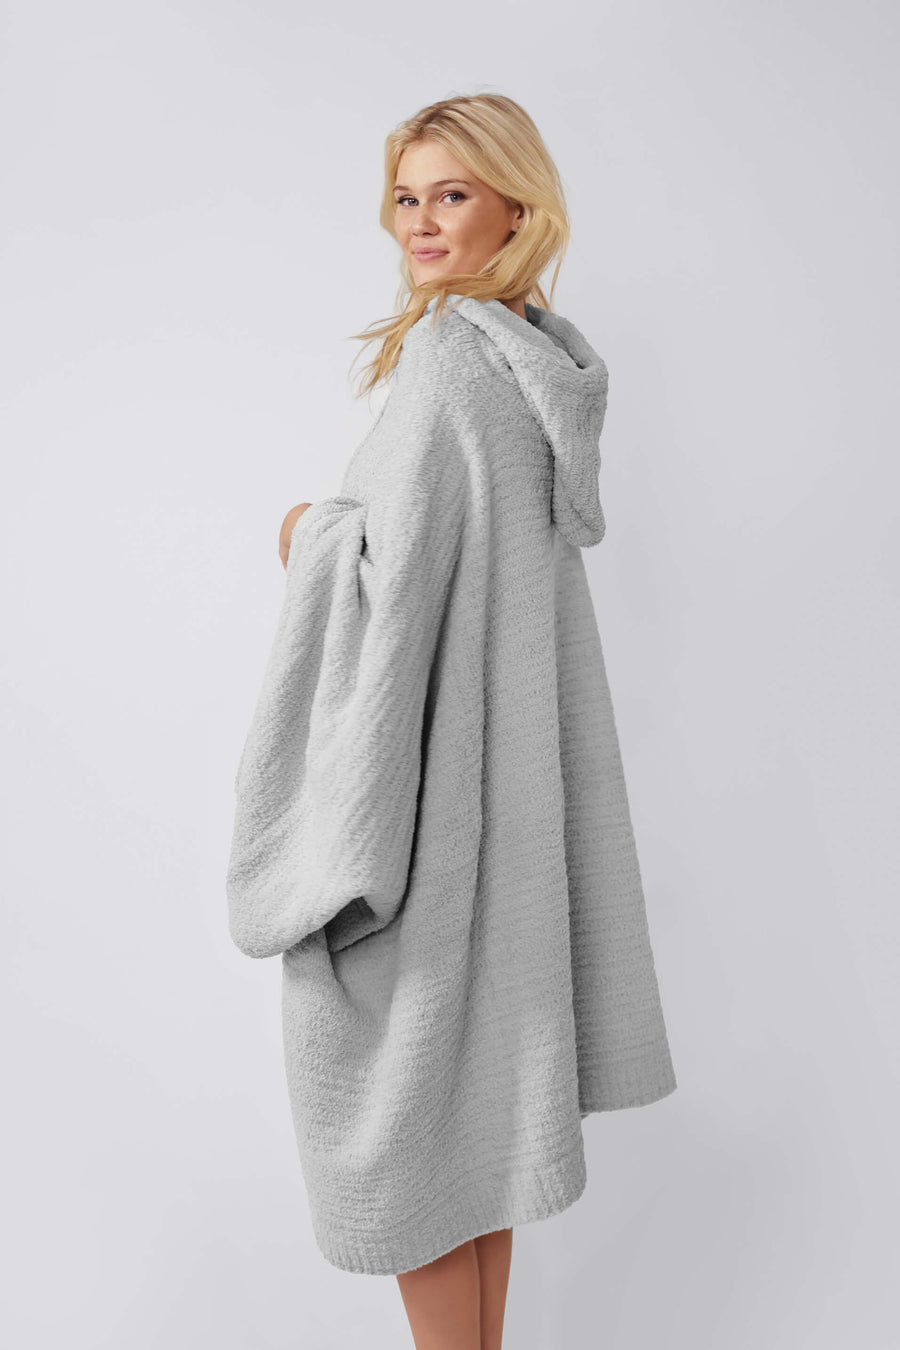 Secondary image of Snug Hooded Wearable Blanket